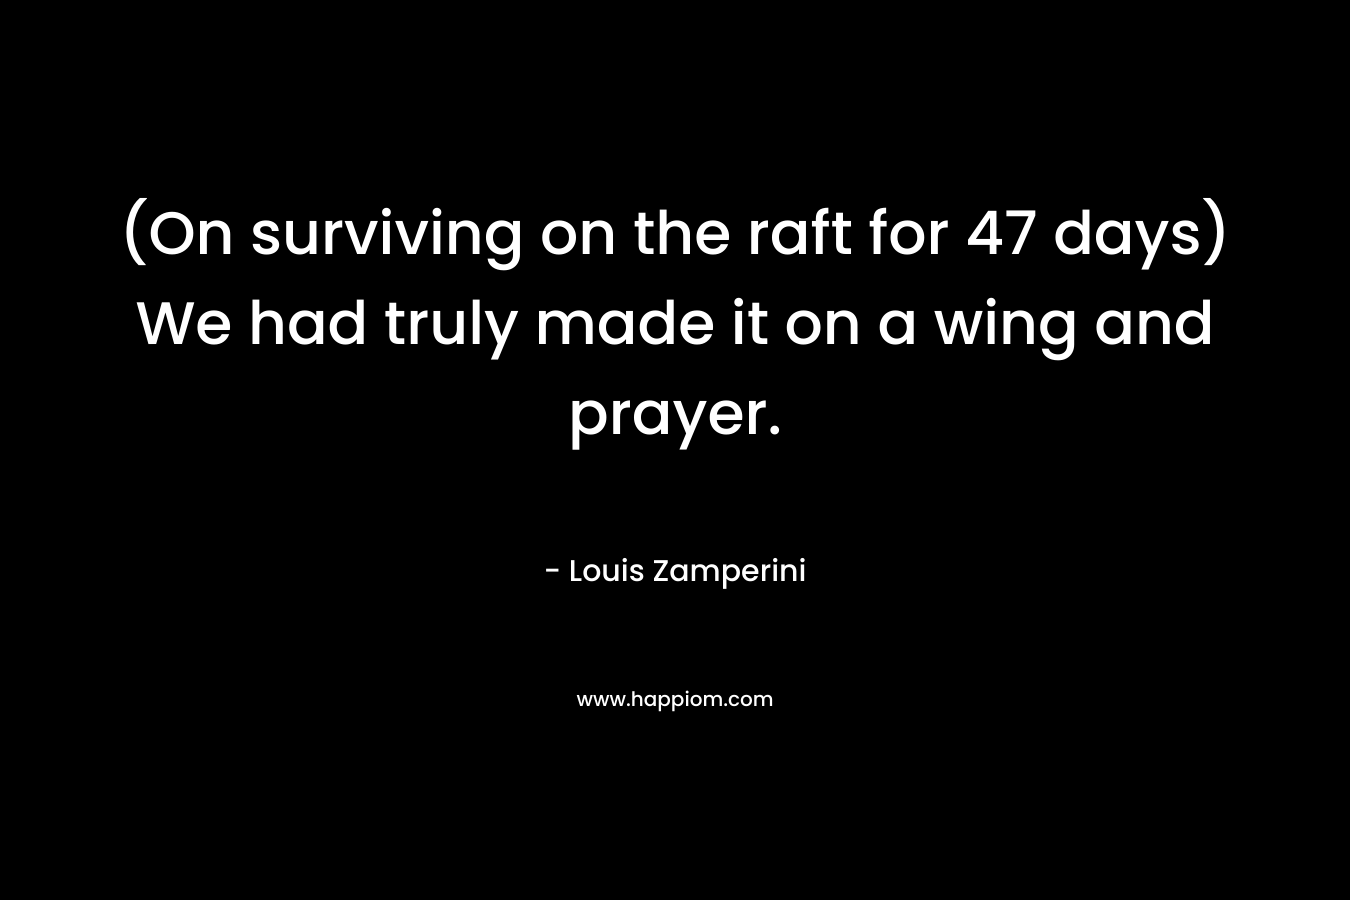 (On surviving on the raft for 47 days) We had truly made it on a wing and prayer. – Louis Zamperini